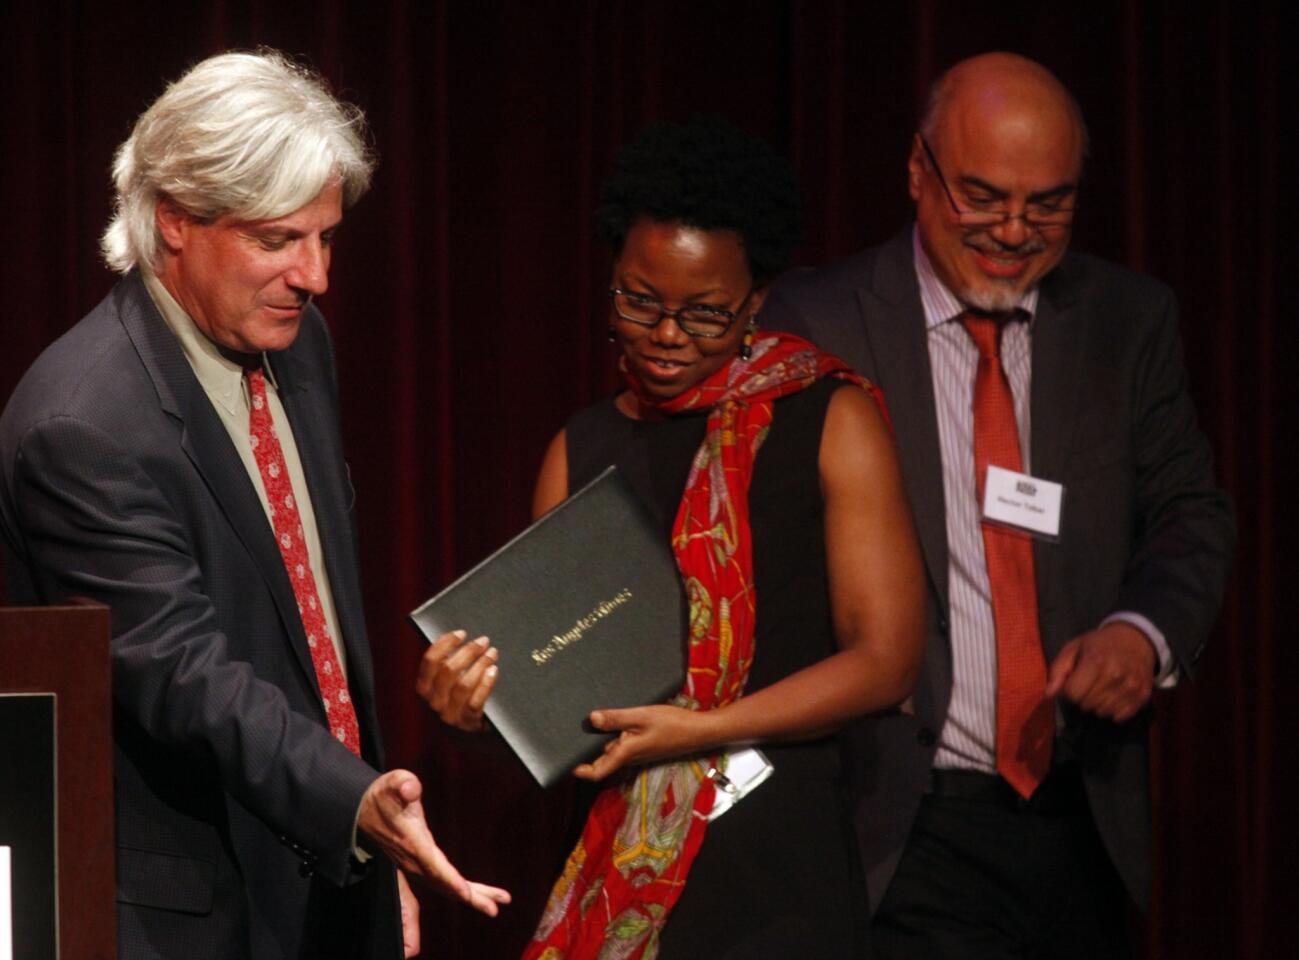 NoViolet Bulawayo, center, wins the Art Seidenbaum Award for first fiction for "We Need New Names." She is flanked by David L. Ulin, left, and Hector Tobar.